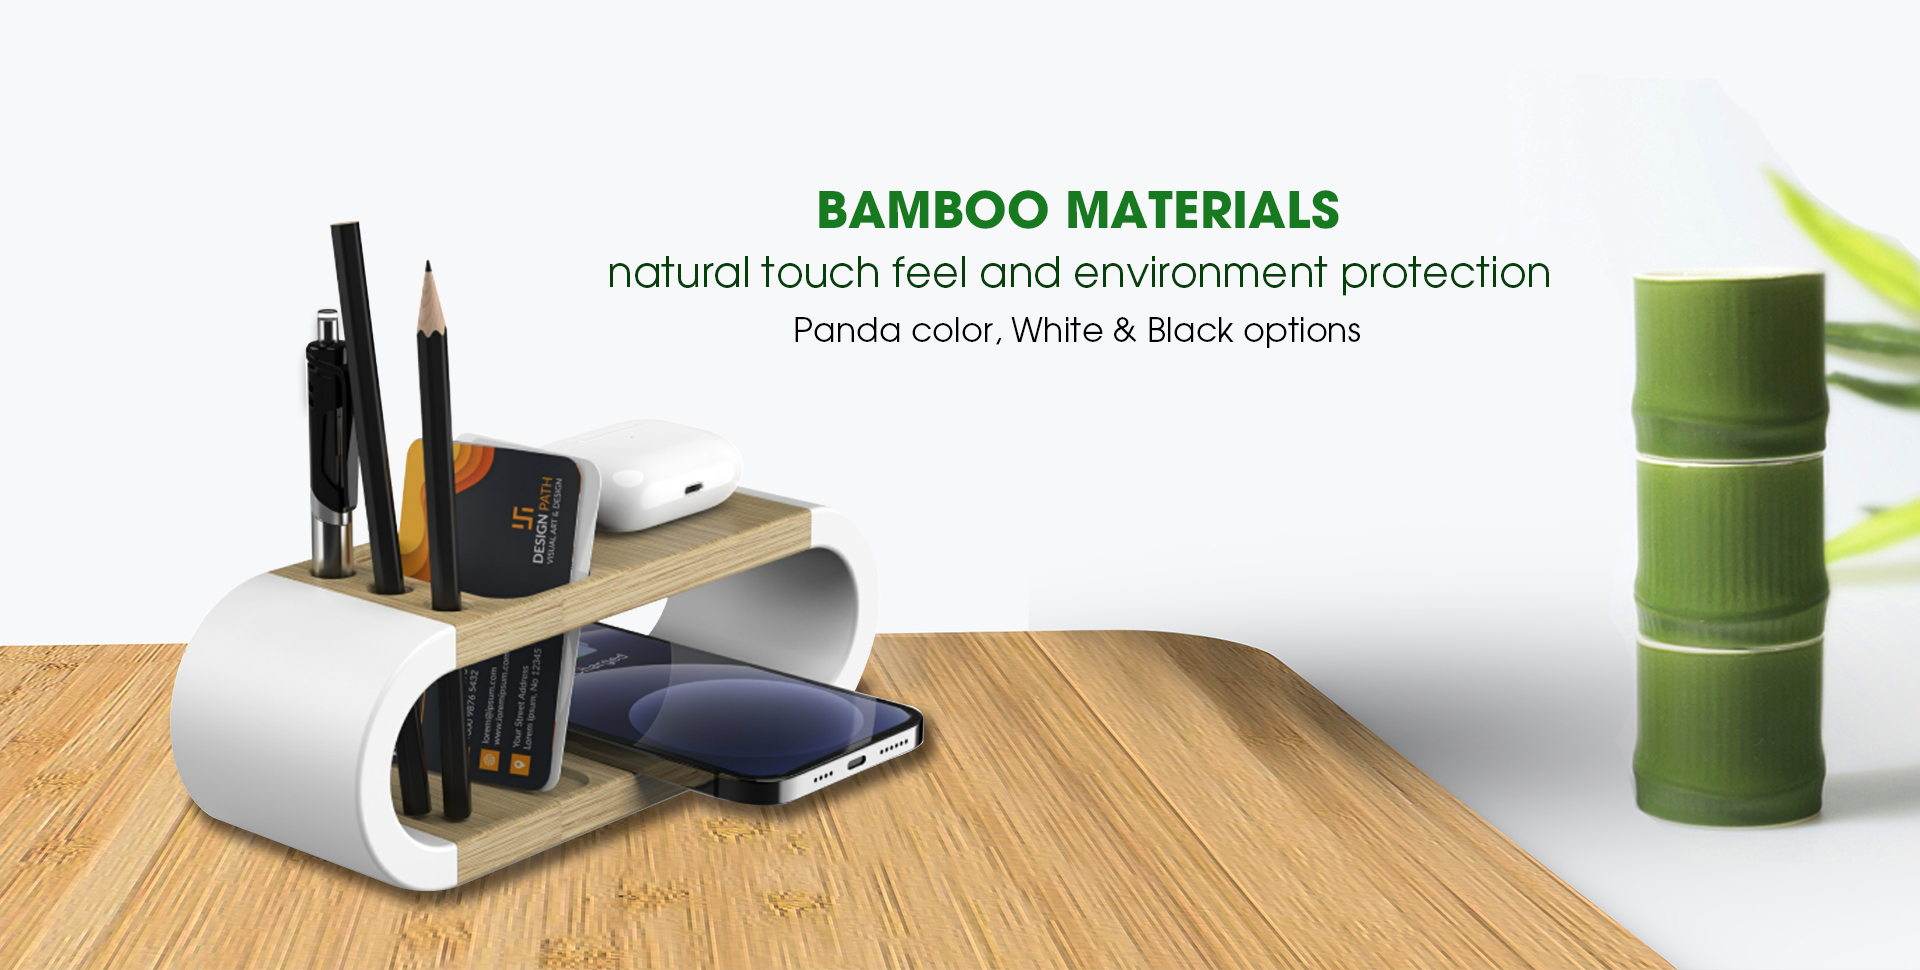 bamboo materials,nature touch feel,environmental protection,white&black color options